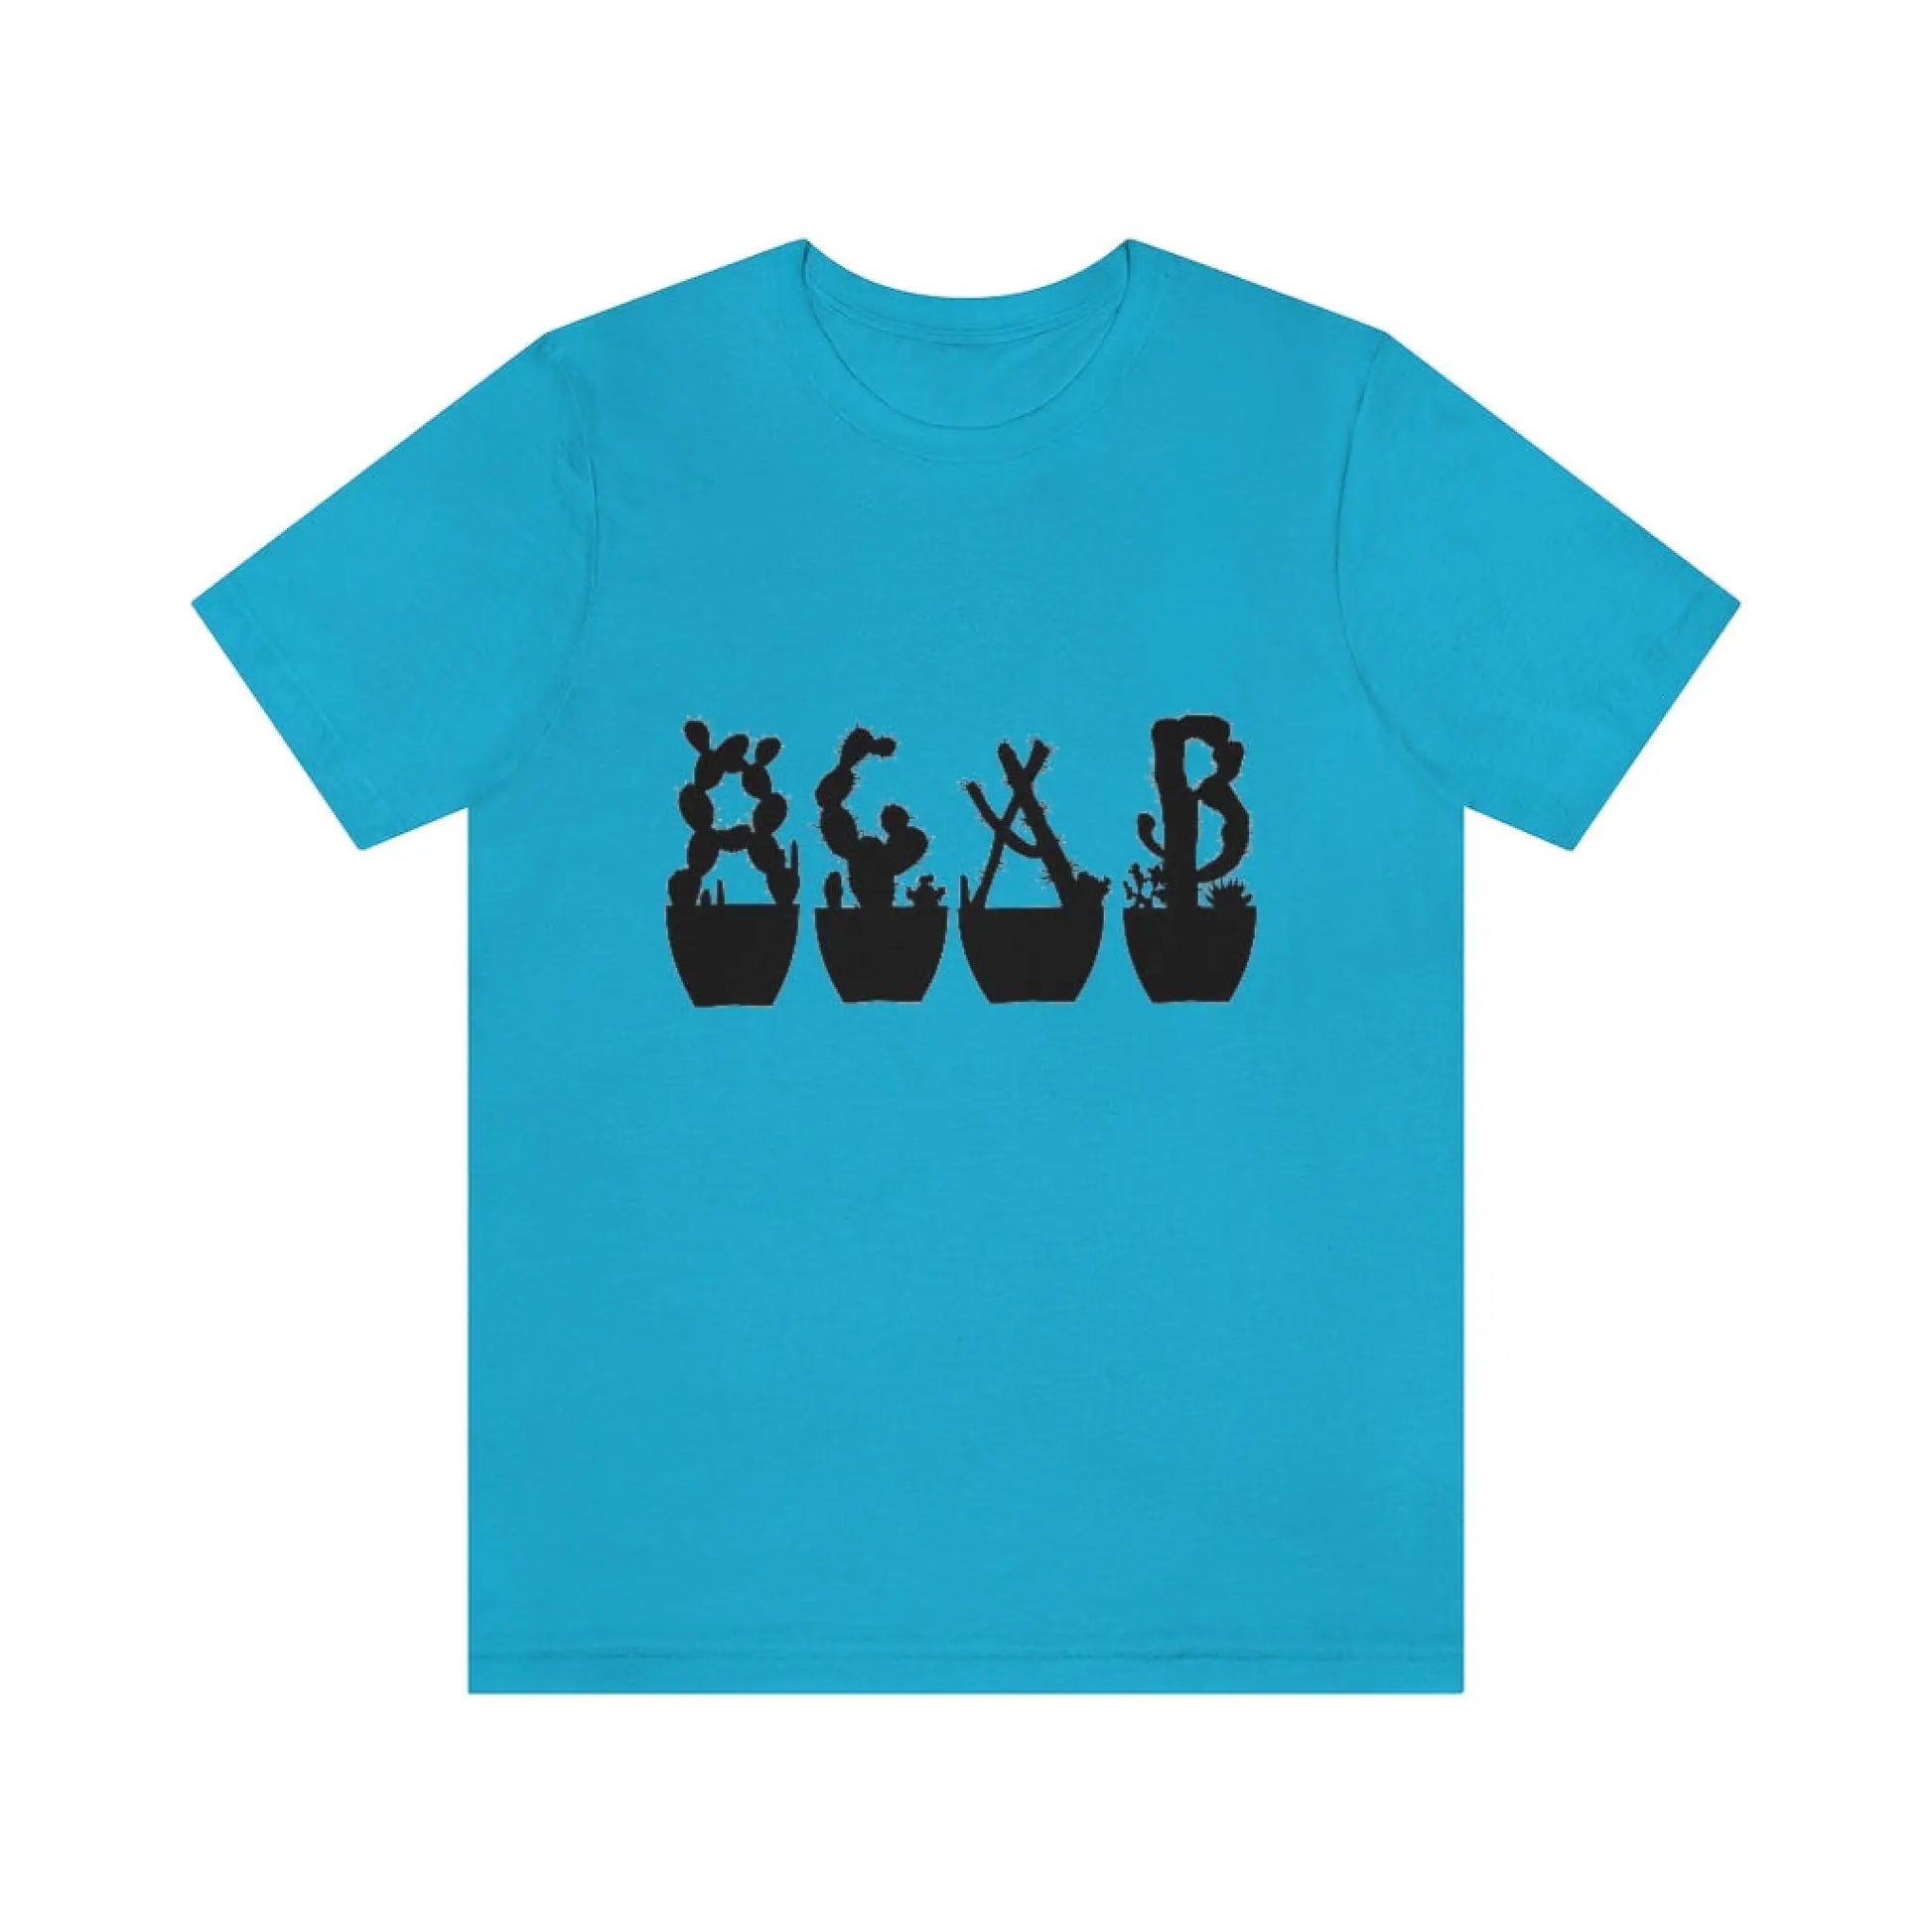 Shirts - Just Beautiful Cactuses - Turquoise / S - T-Shirt